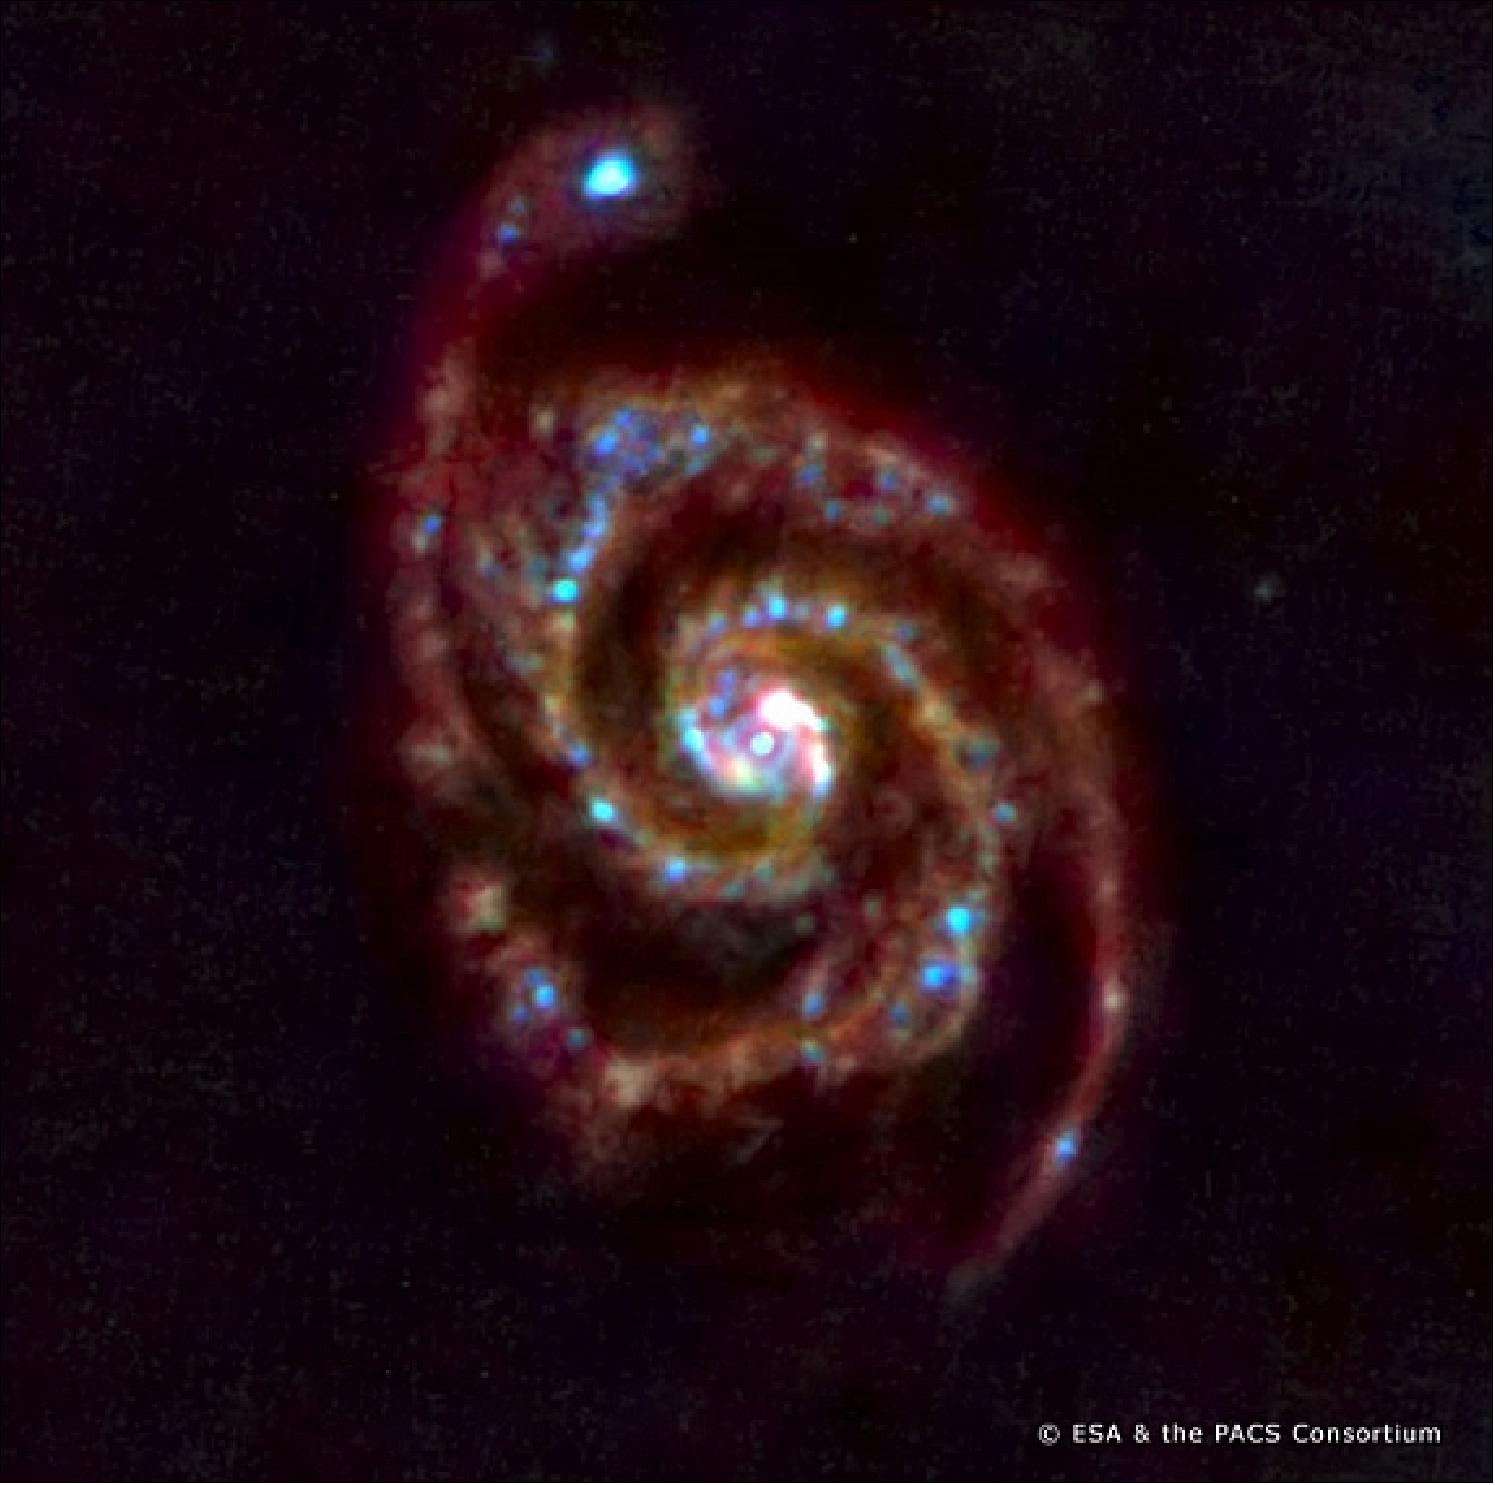 Figure 83: Herschel/PACS images of M51 ("Whirlpool Galaxy"), image credit: ESA and the PACS Consortium